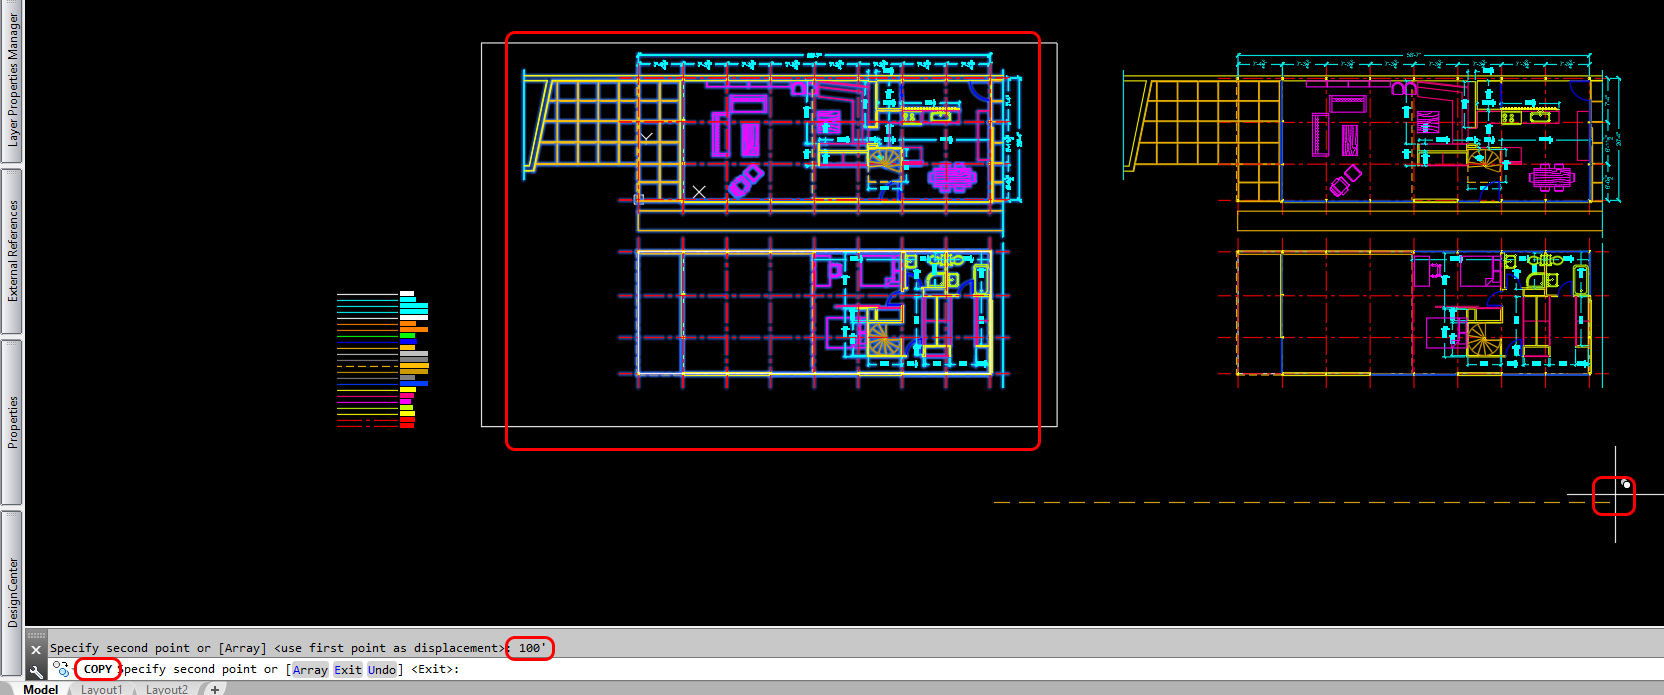 This image shows the process image copying floor plans for a section drawing.